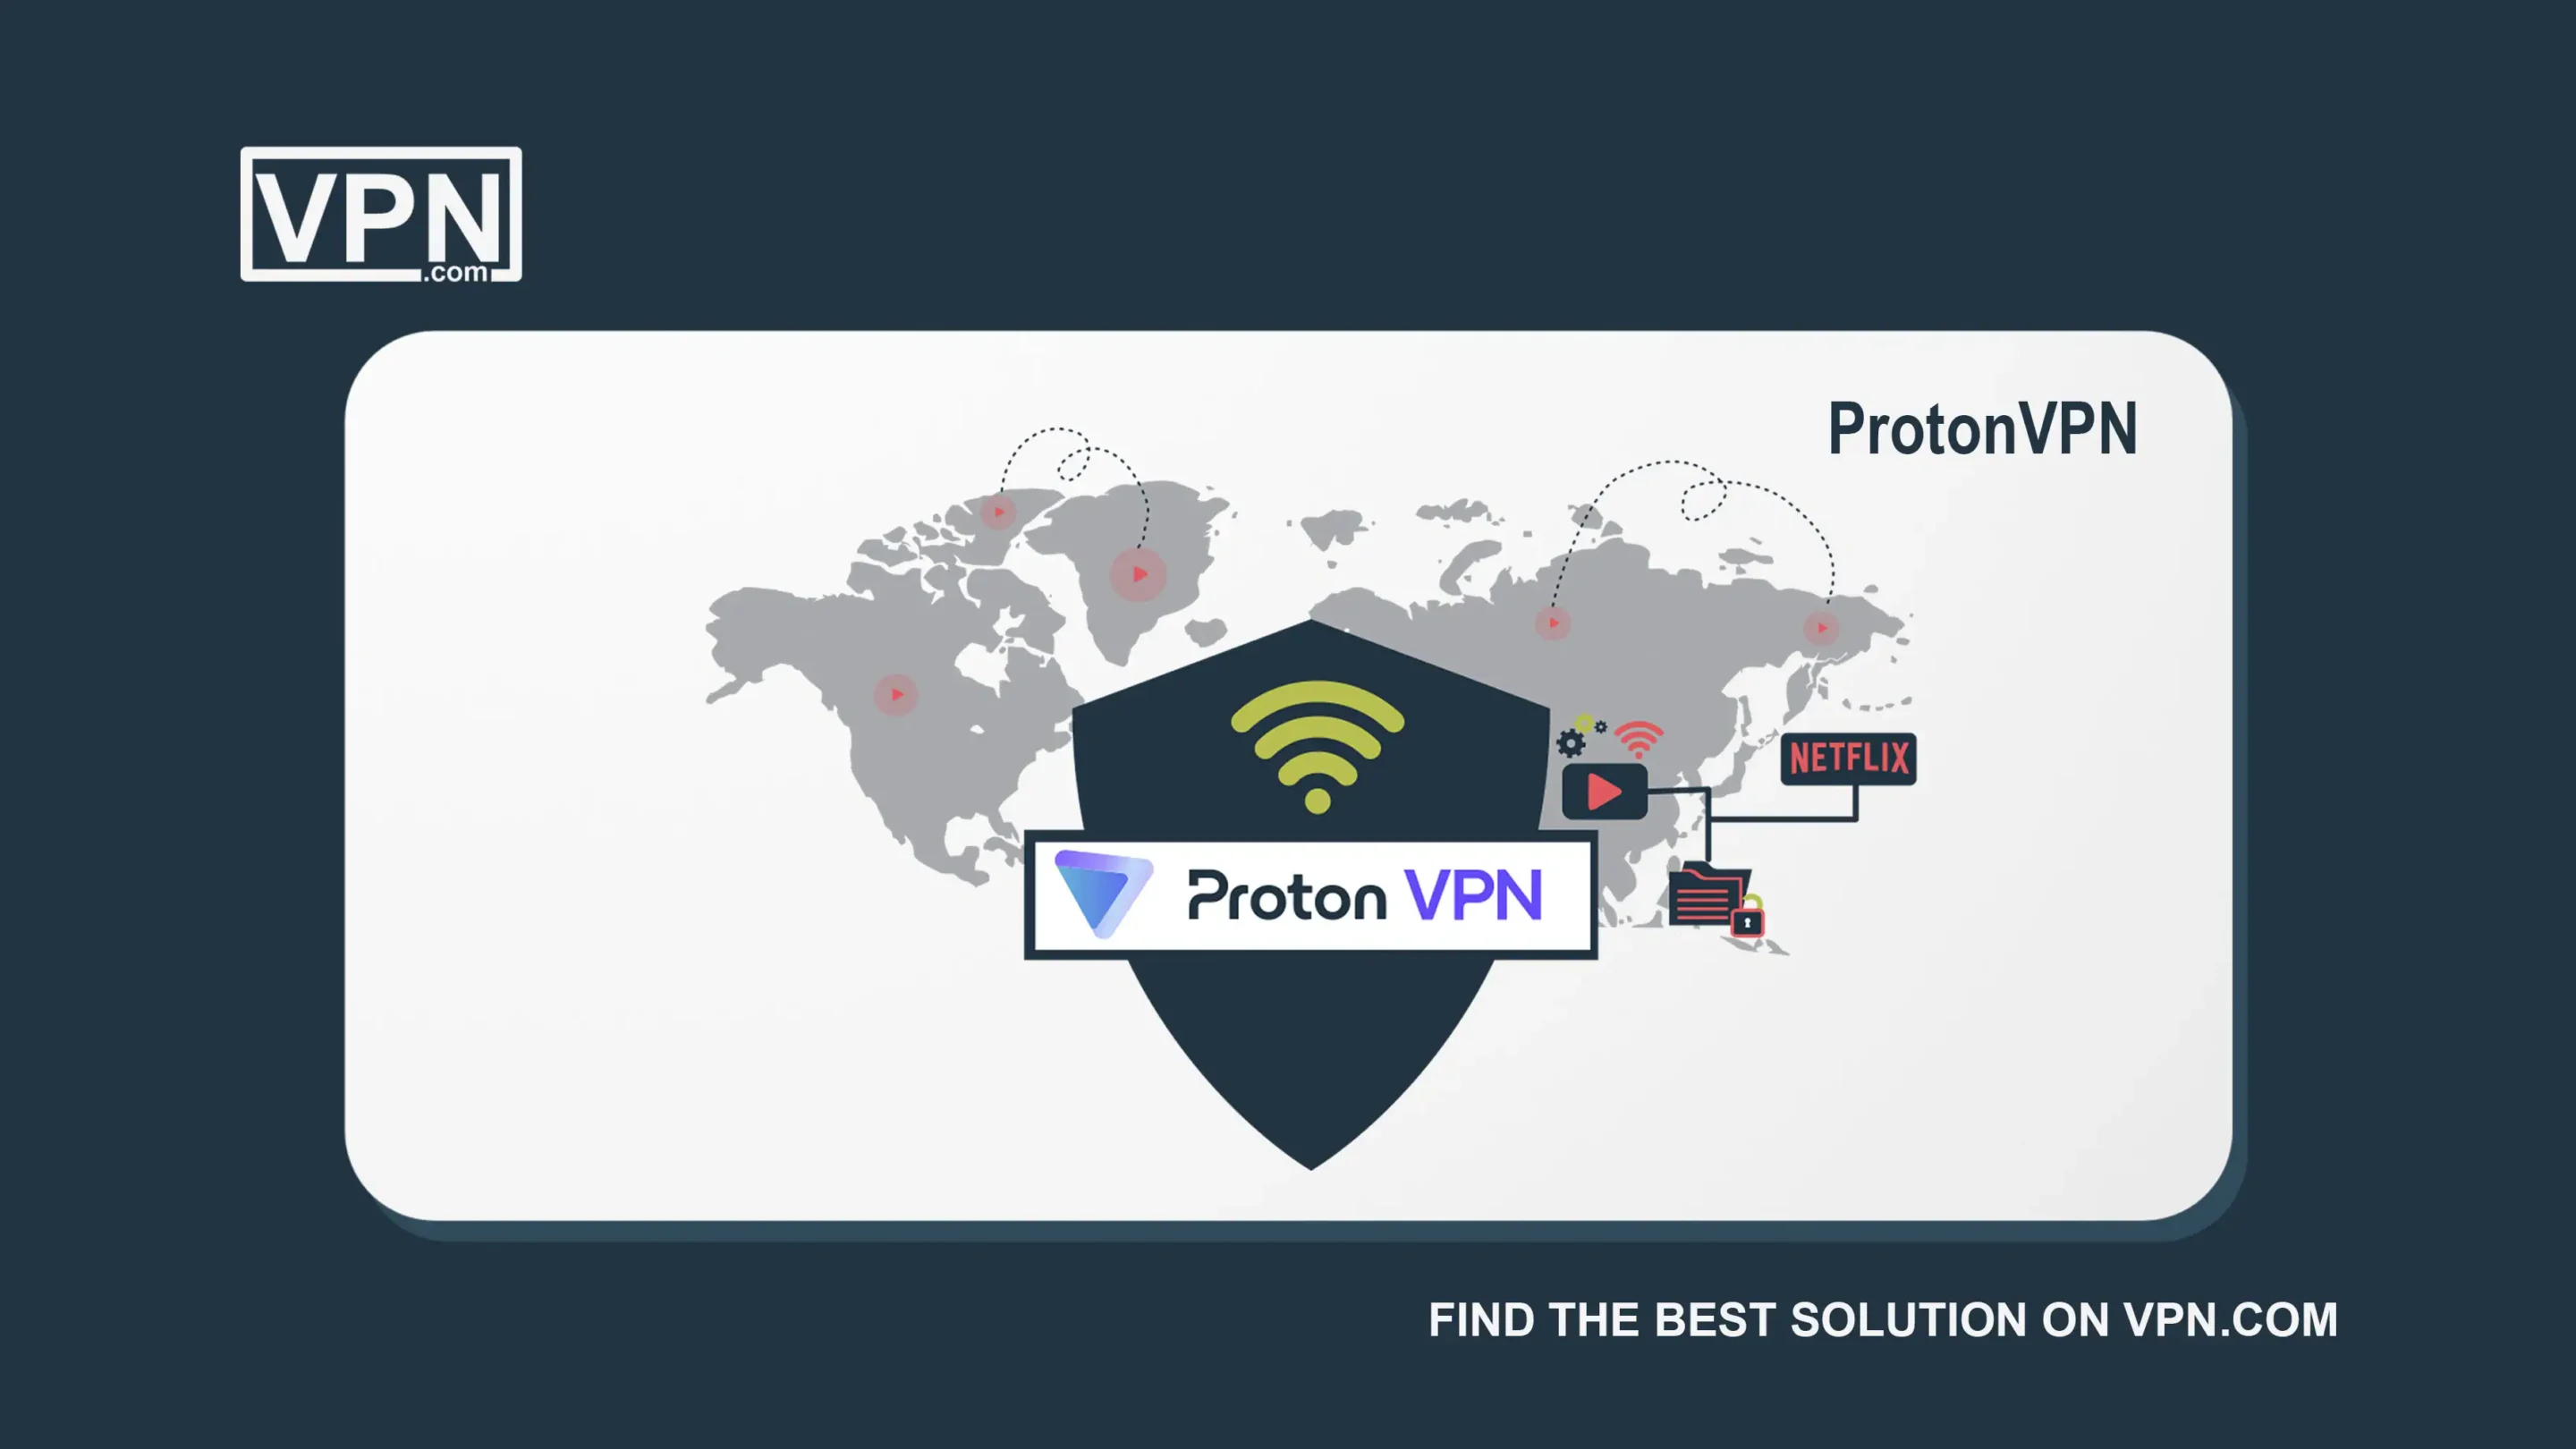 Does ProtonVPN Work Effectively With Streaming Services Like Netflix